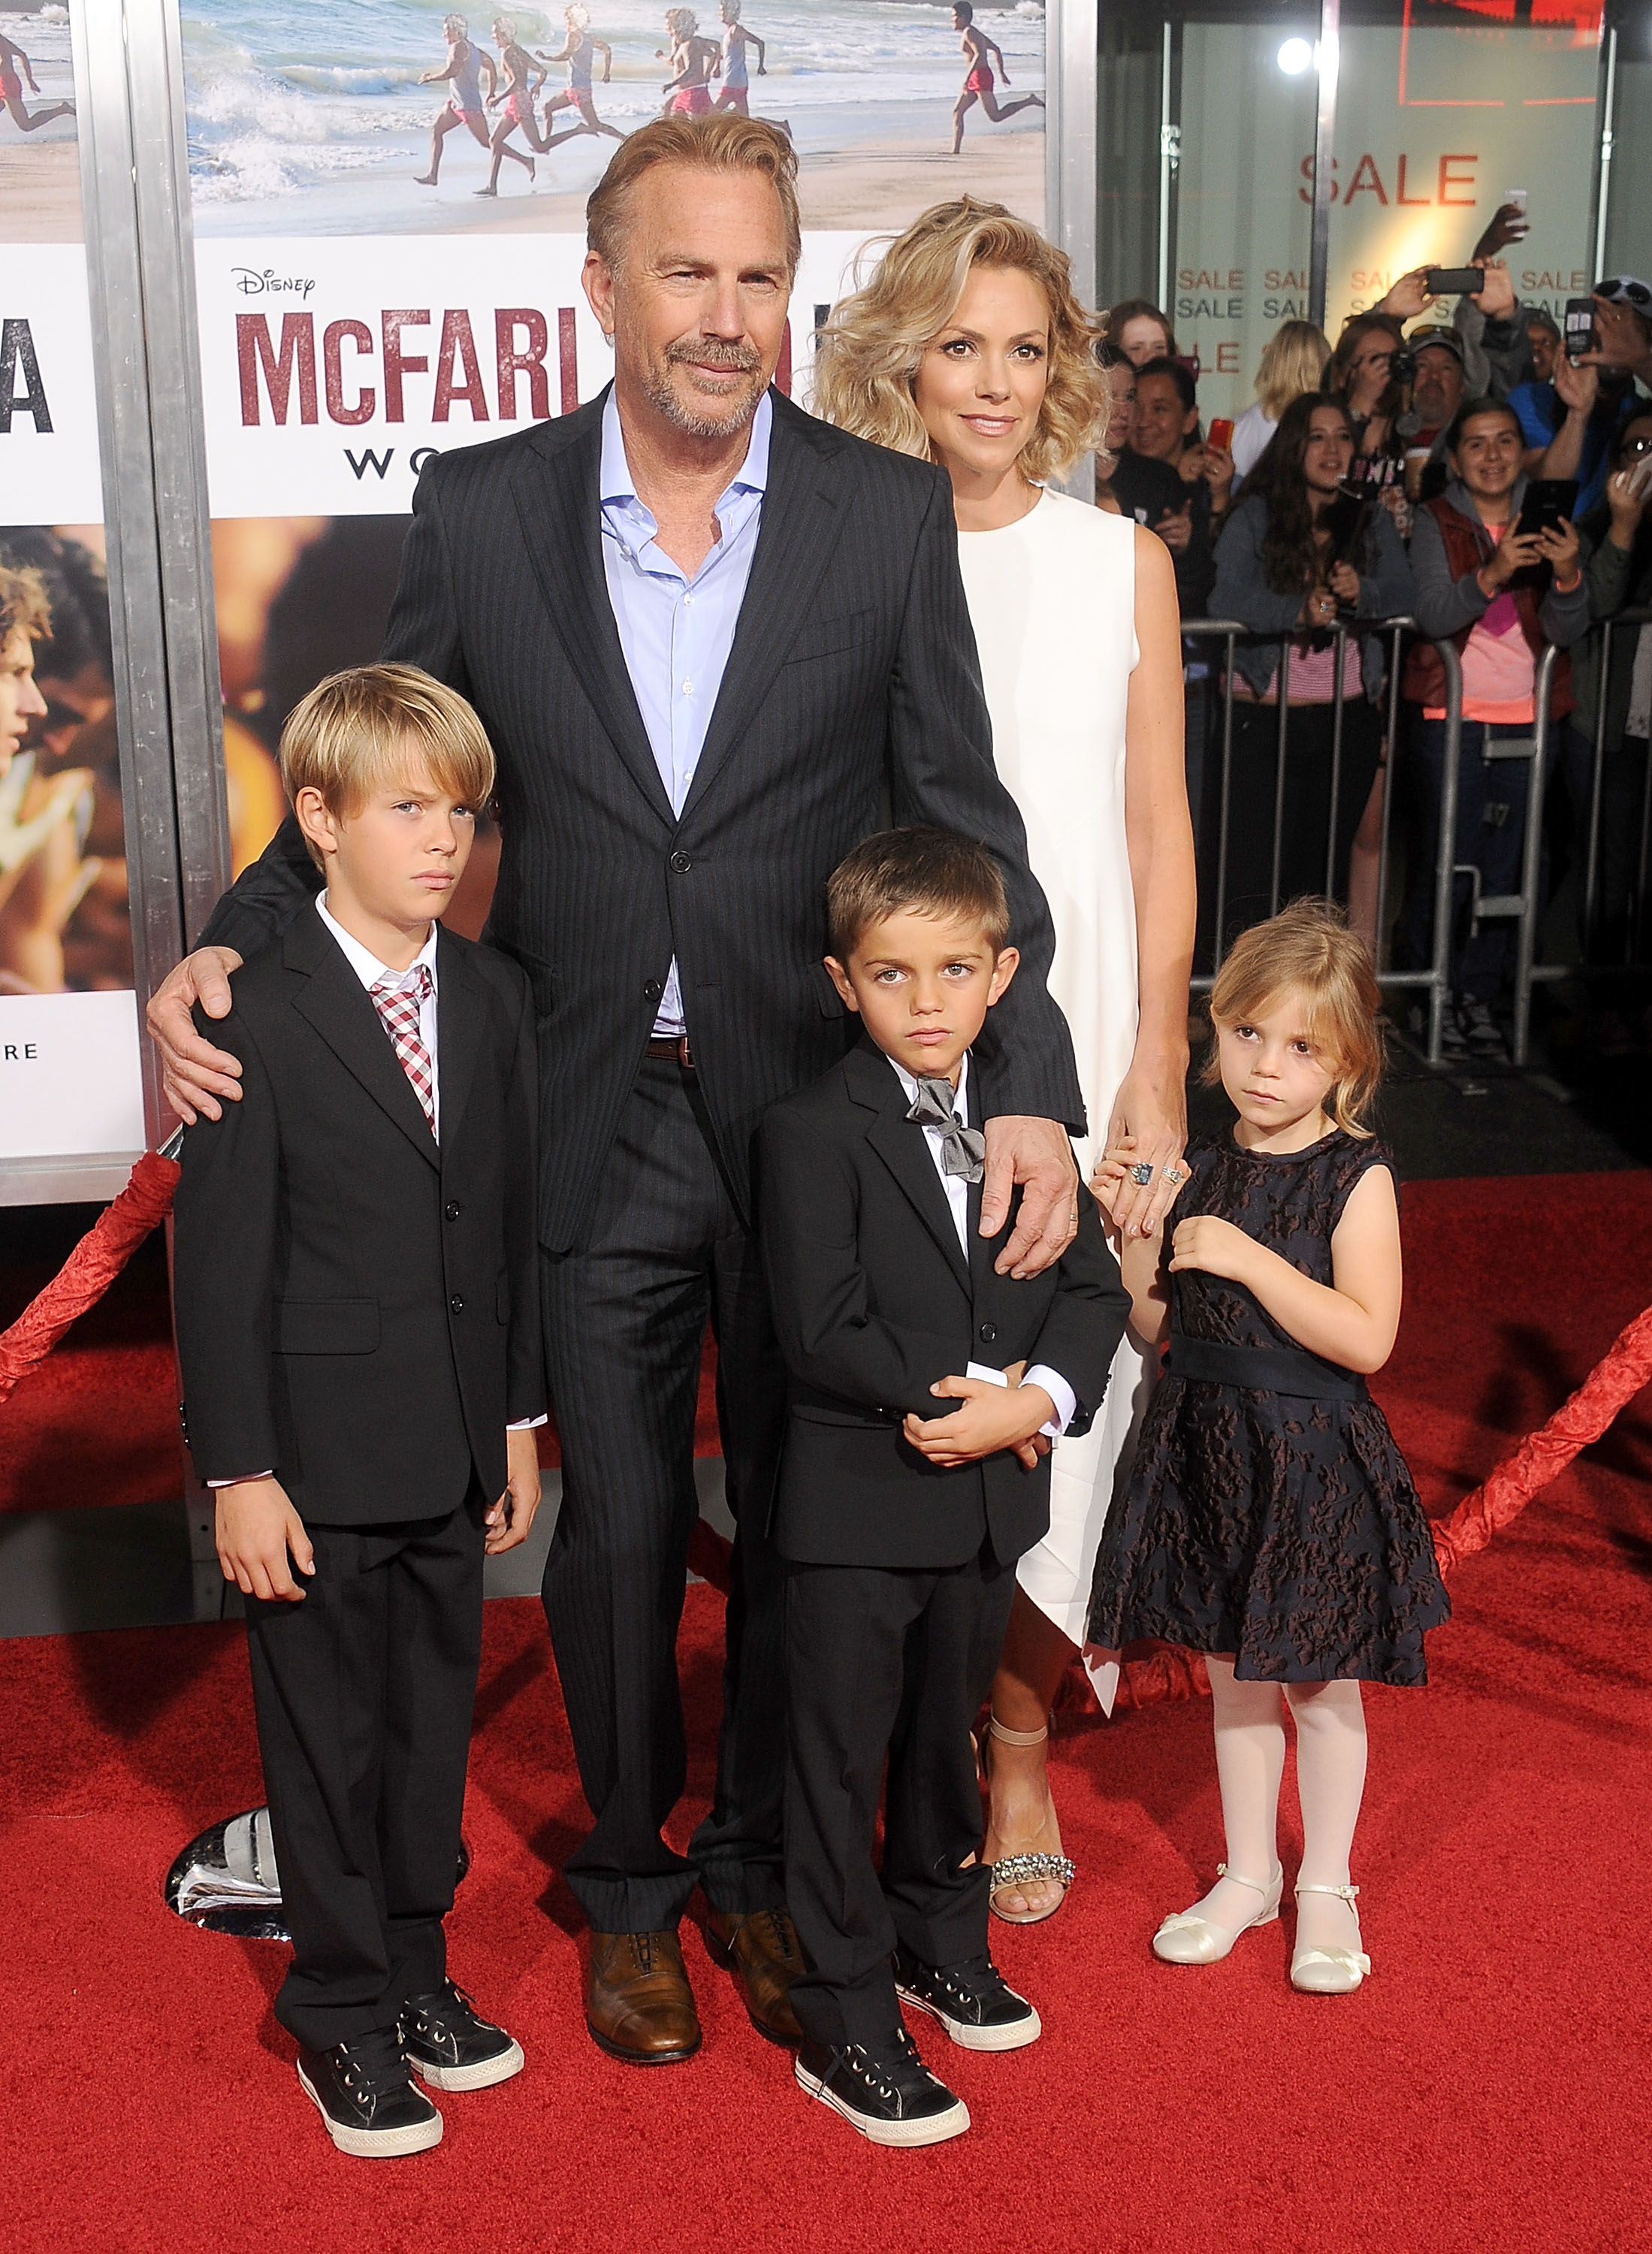 Kevin Costner, Christine Baumgartner and their kids Grace Avery, Hayes Logan, and Cayden Wyatt Costner at the World Premiere of "McFarland, USA" in Hollywood, California, on February 9, 2015. | Source: Getty Images